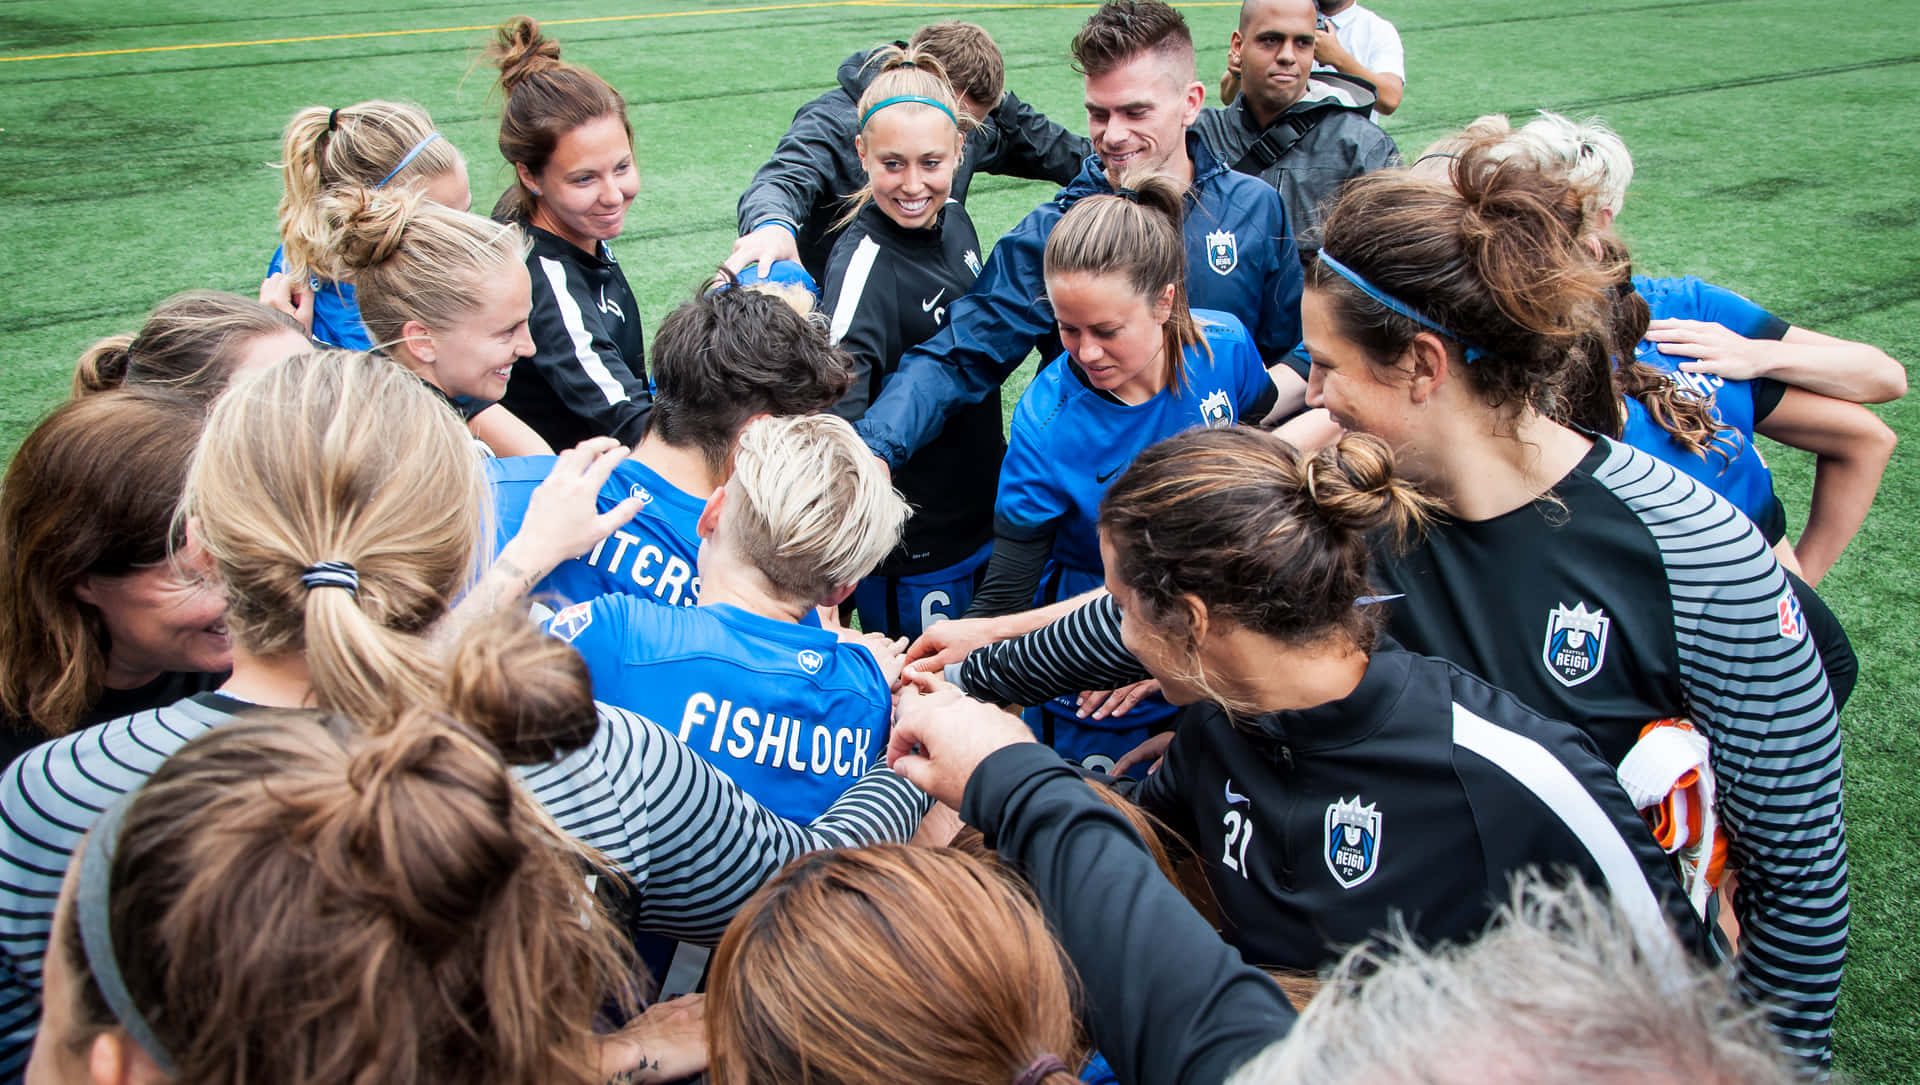 A Group Of Women Soccer Players Huddled Together